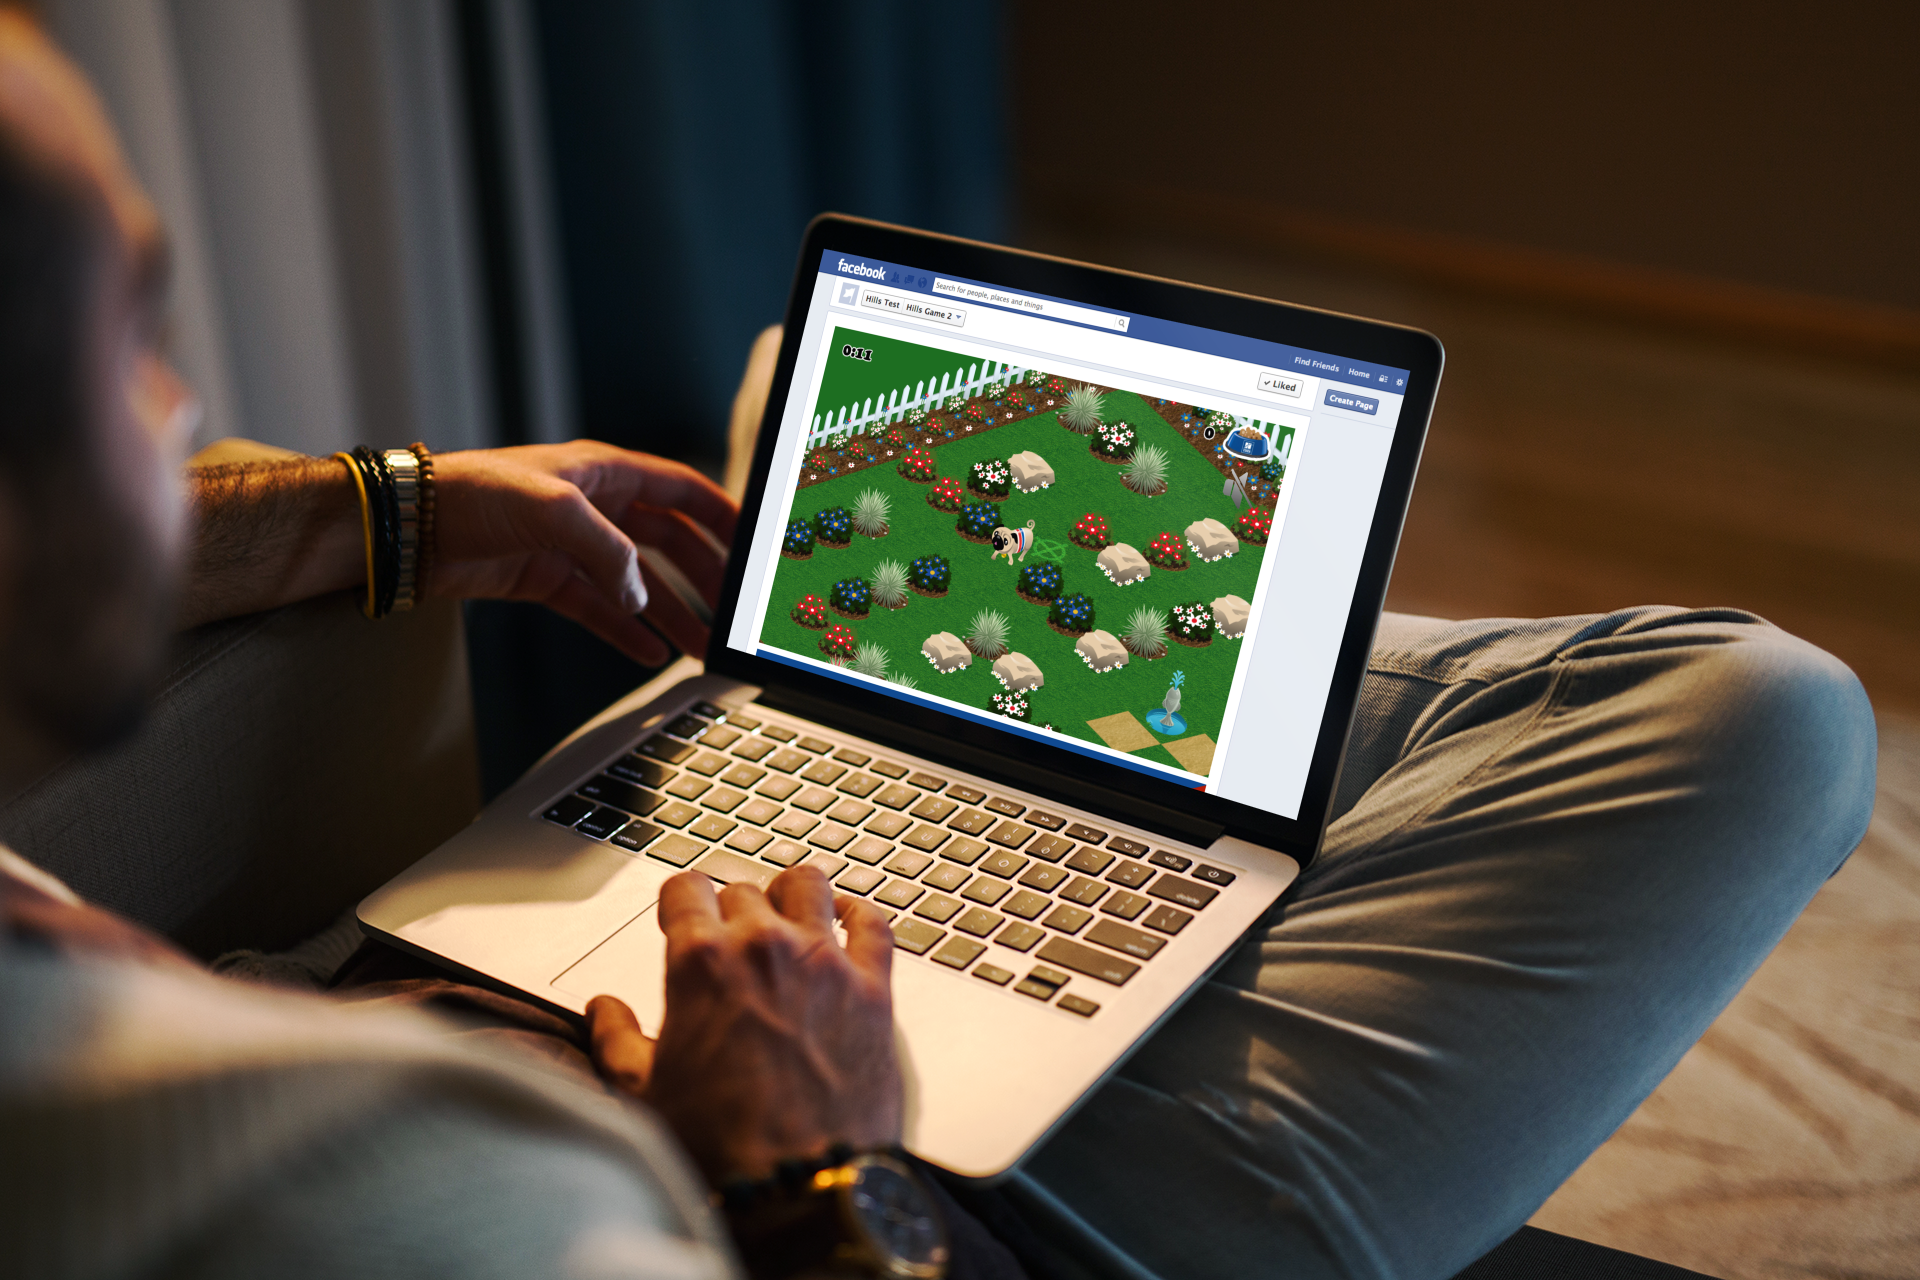 Kibble Quest game displayed on a laptop